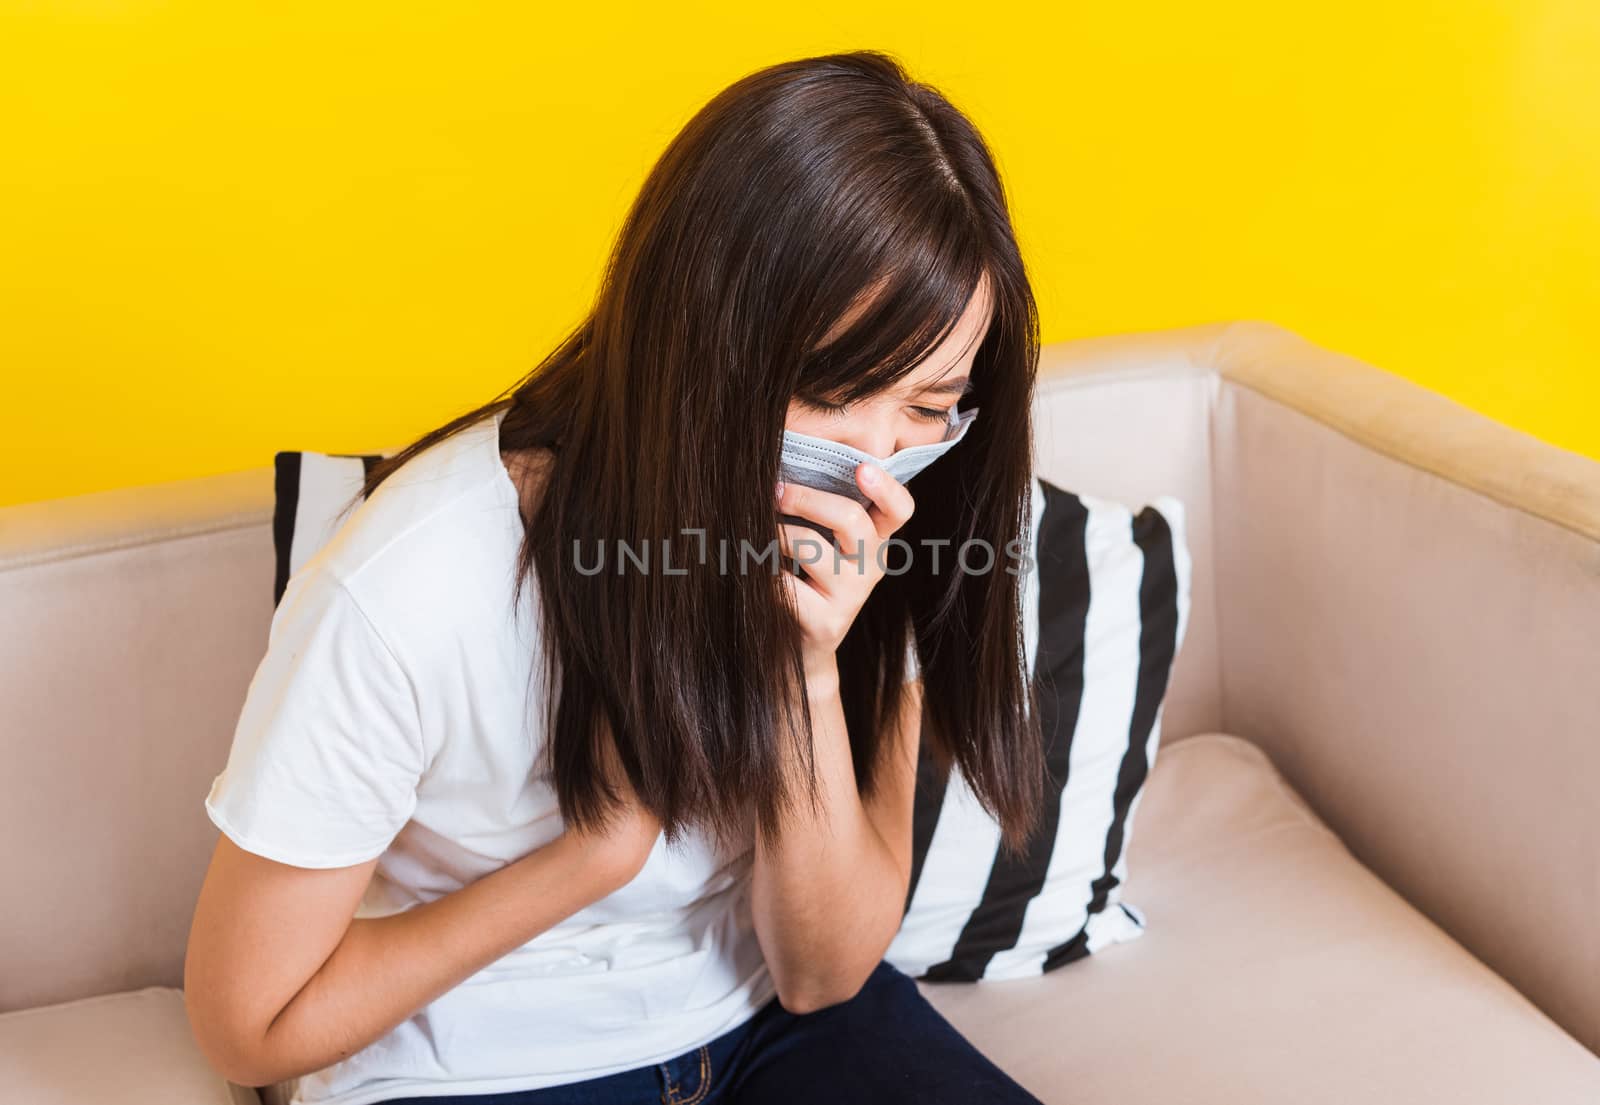 Asian young woman sitting on a sofa wearing surgical protection face mask hygiene against coronavirus and her sneeze hand close mouth, studio shot isolated on yellow background with copy space